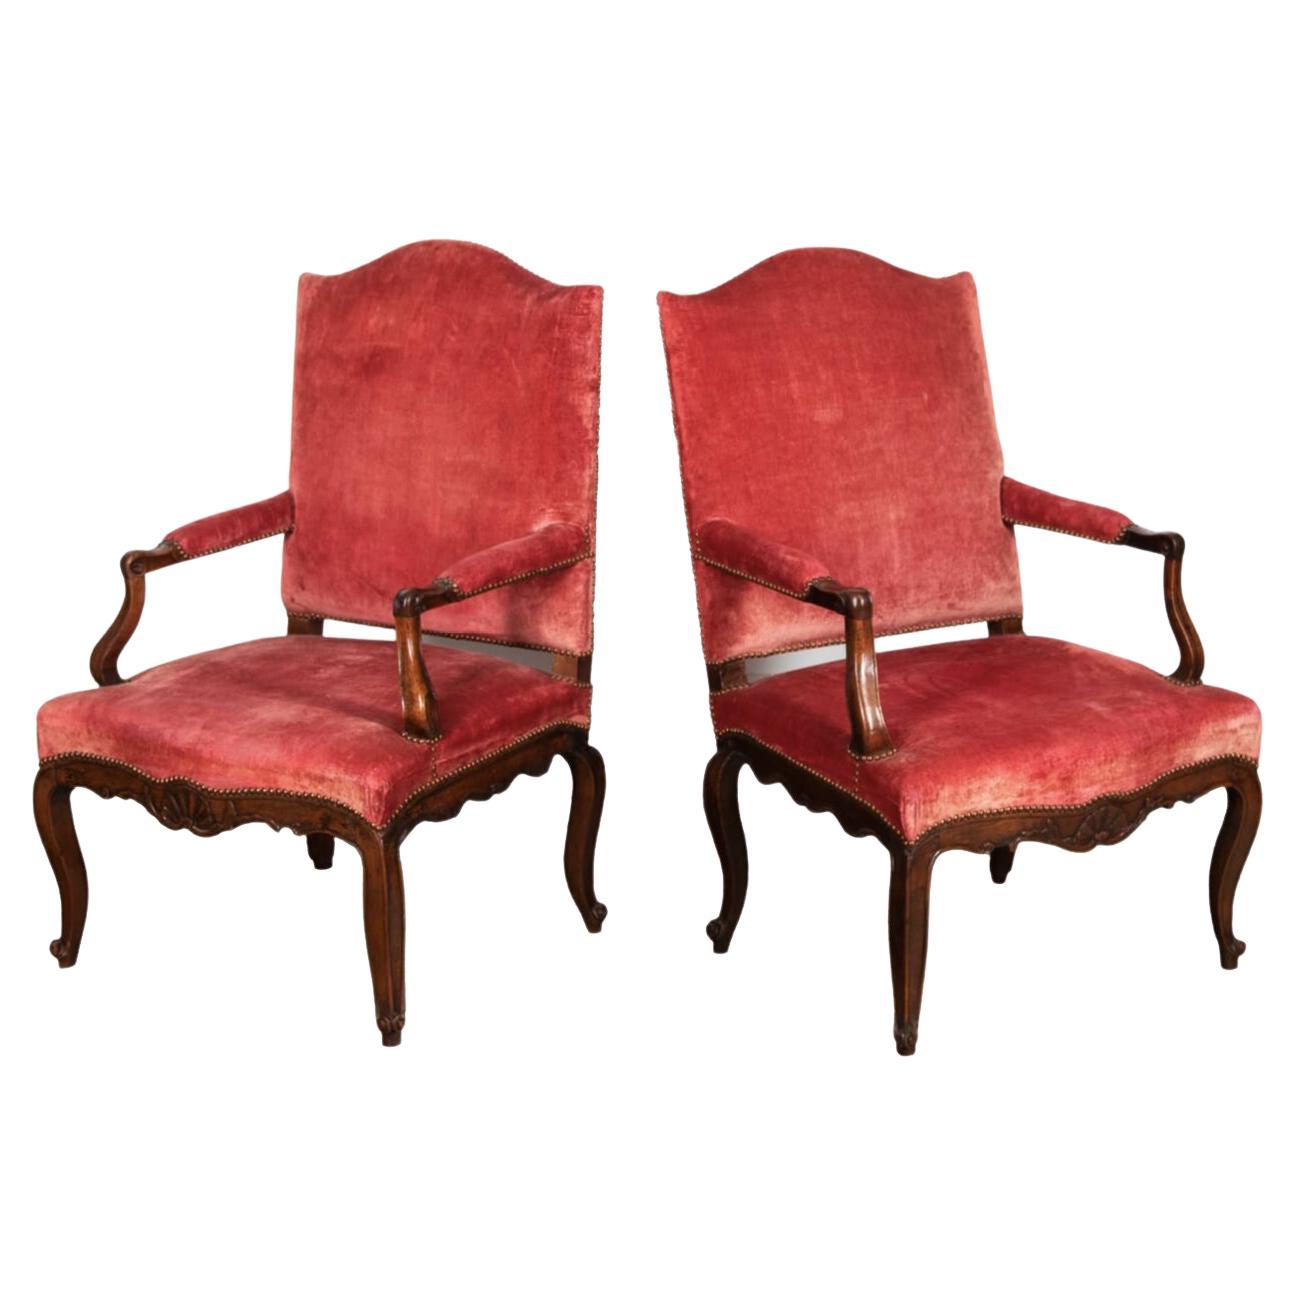 Pair of French Walnut and Velvet 18th Century Elbow Chairs For Sale